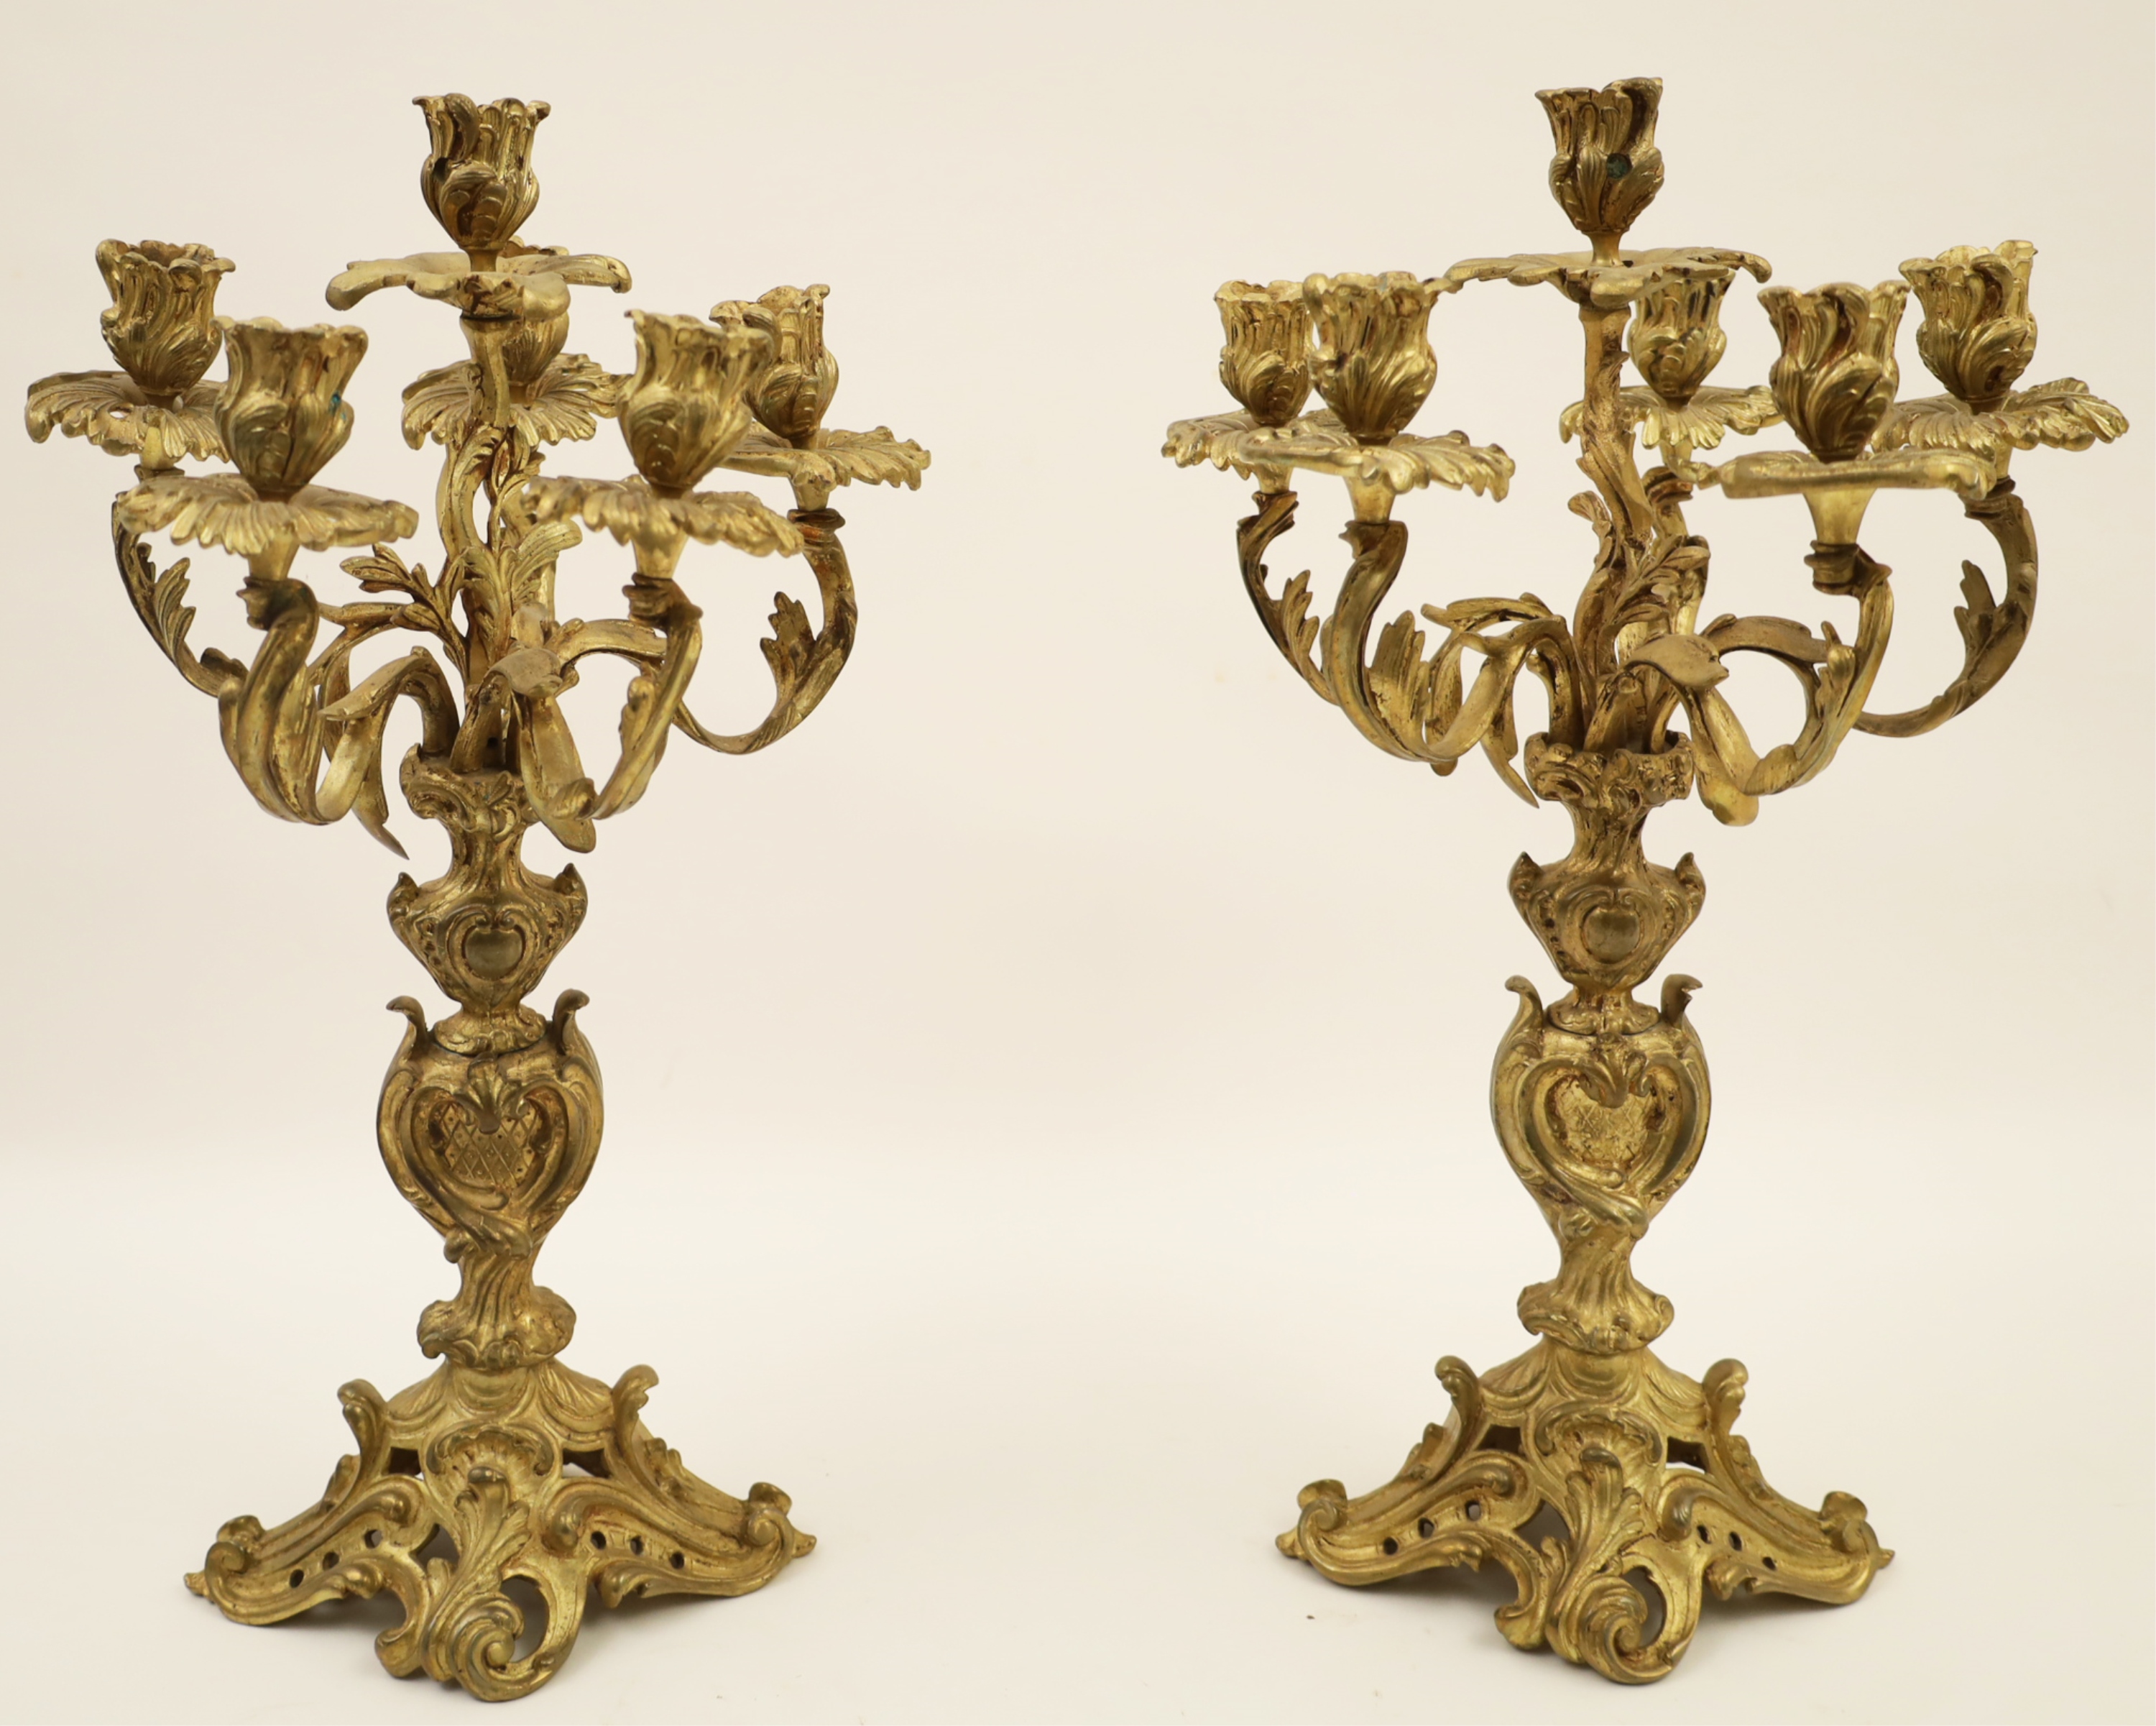 PAIR OF FRENCH BRONZE SIX LIGHT 2b7a0a